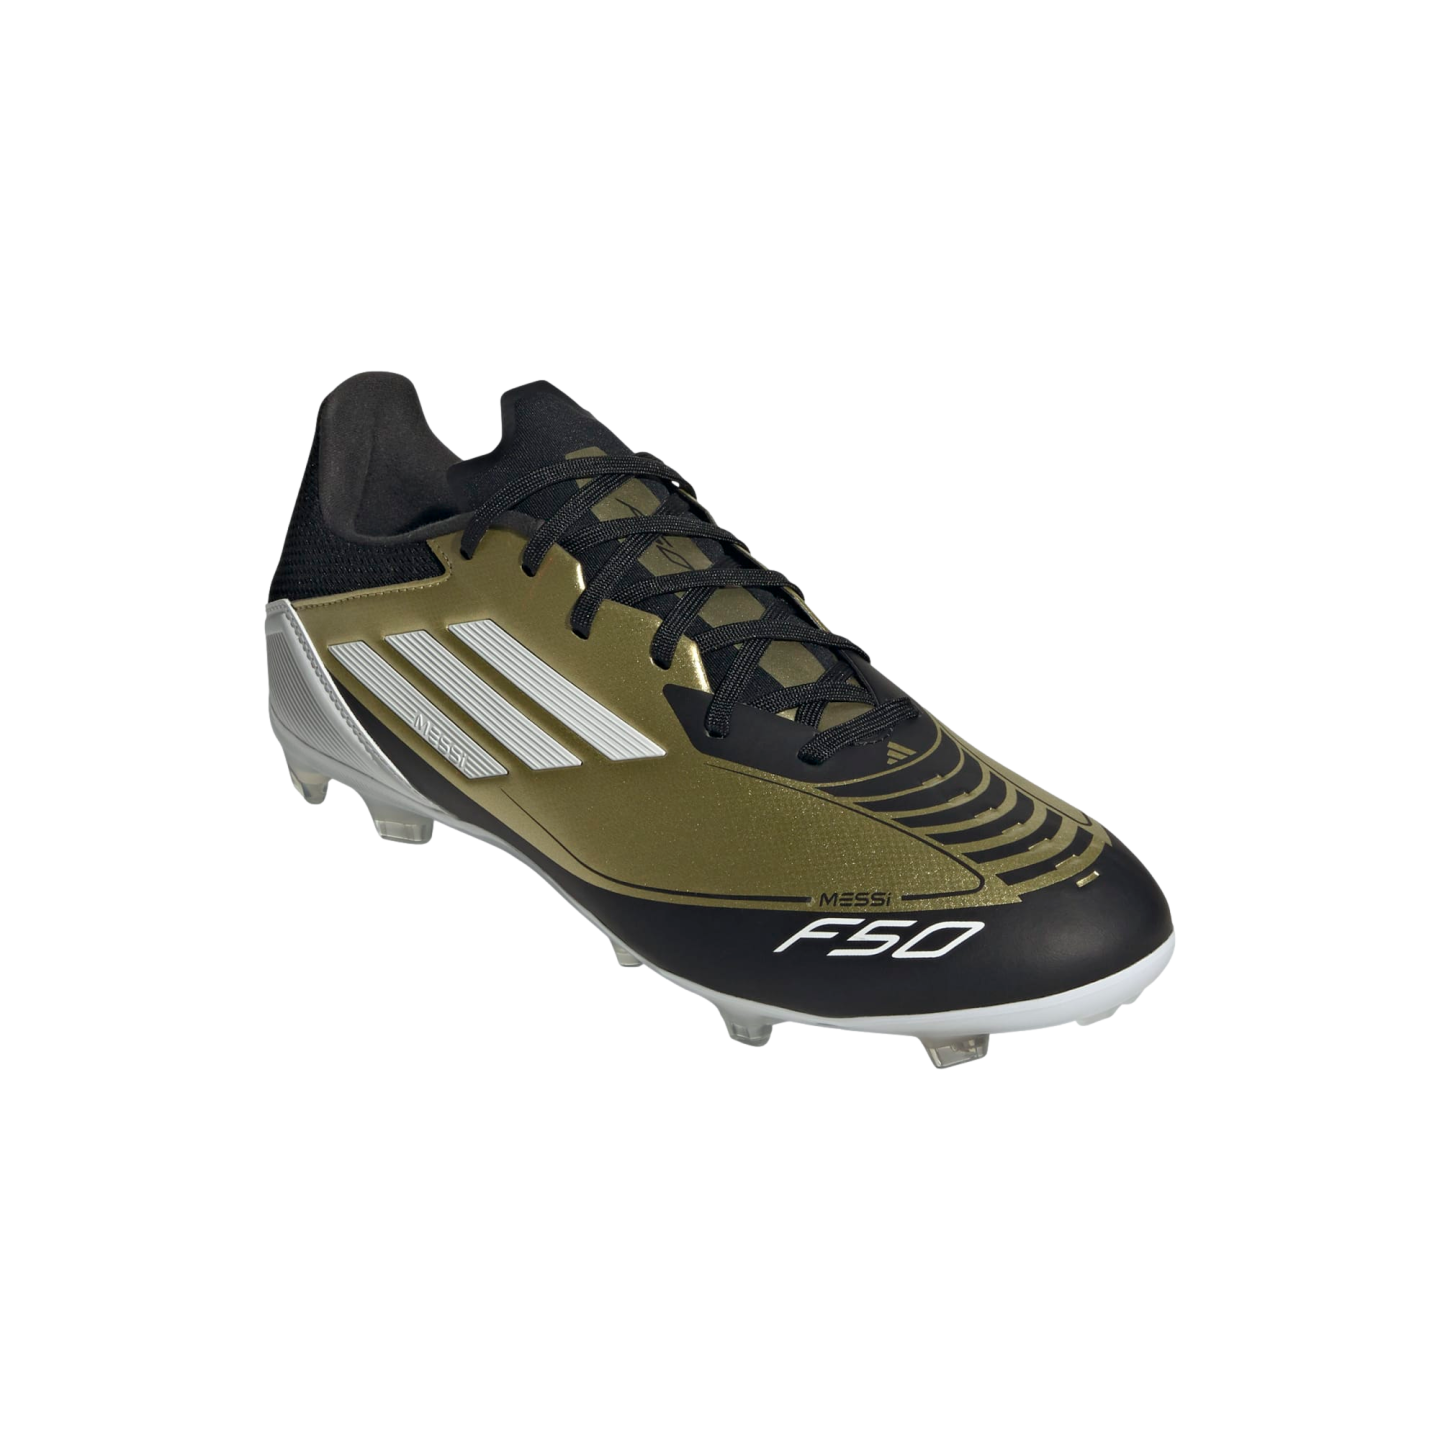 Adidas F50 League Messi Firm Ground Cleats